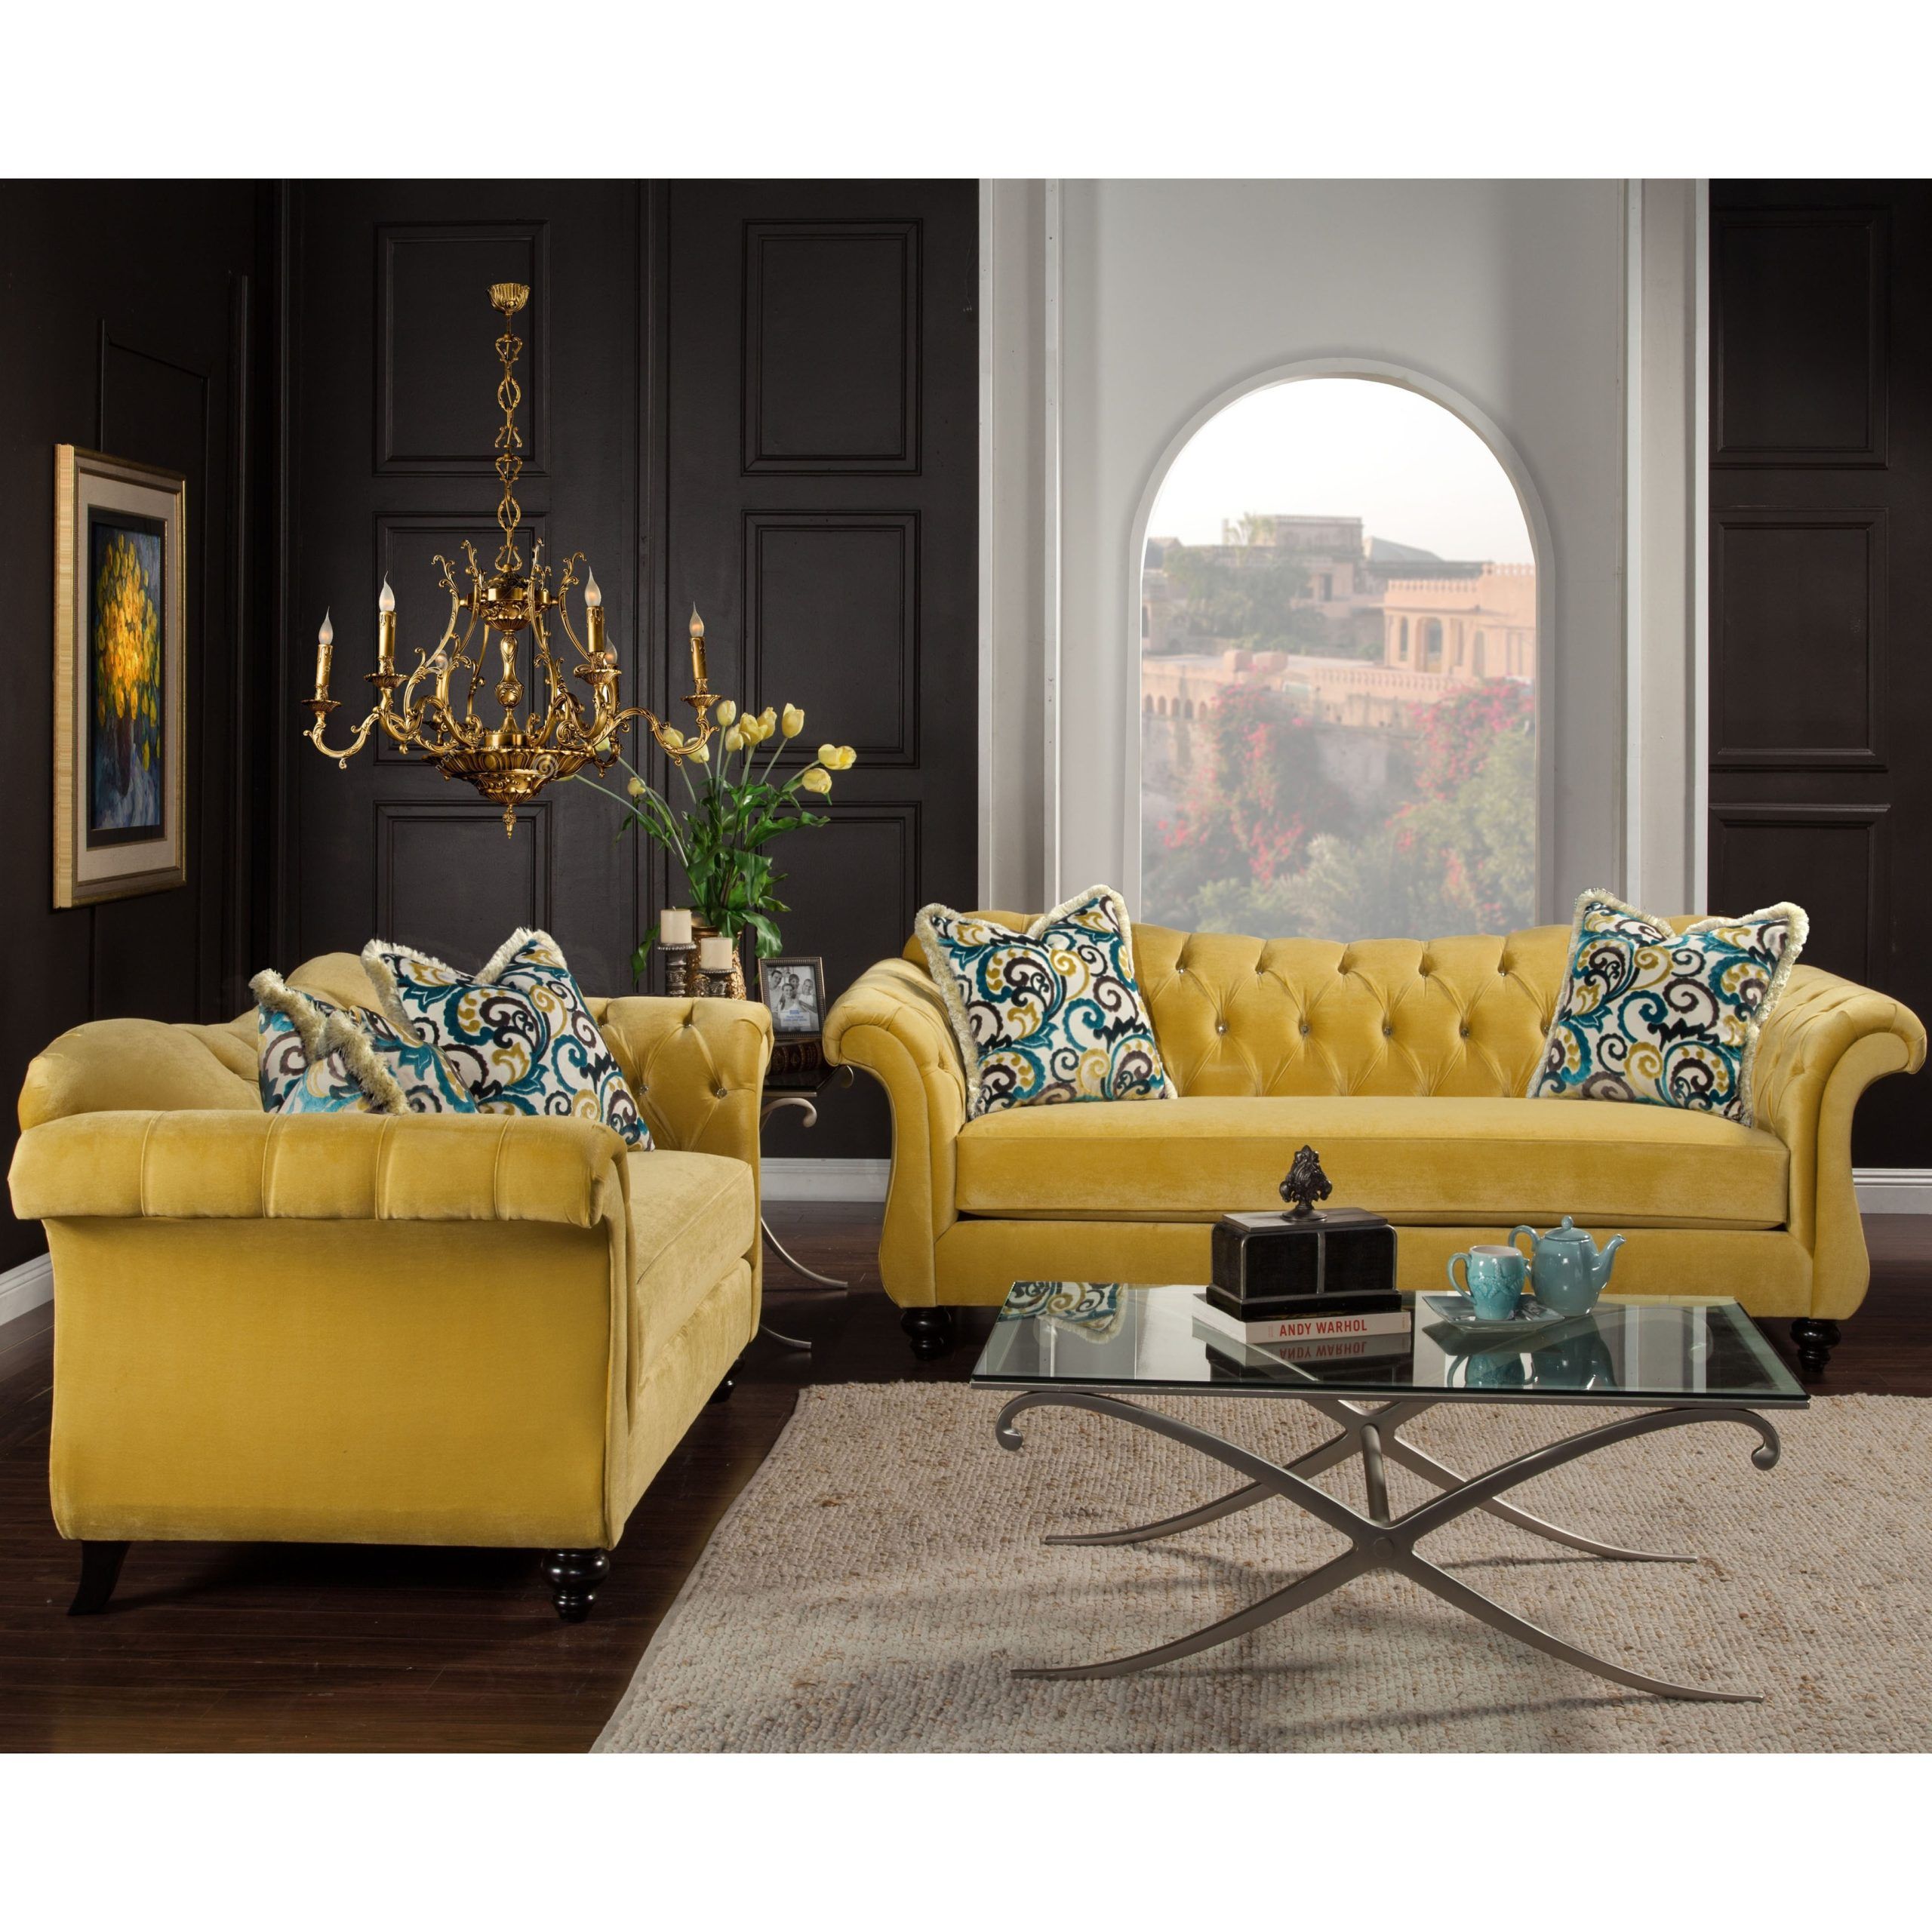 Furniture Of America Agatha 2 Piece Tufted Velvet And Hardwood Sofa And Pertaining To Sofas In Multiple Colors (View 7 of 20)